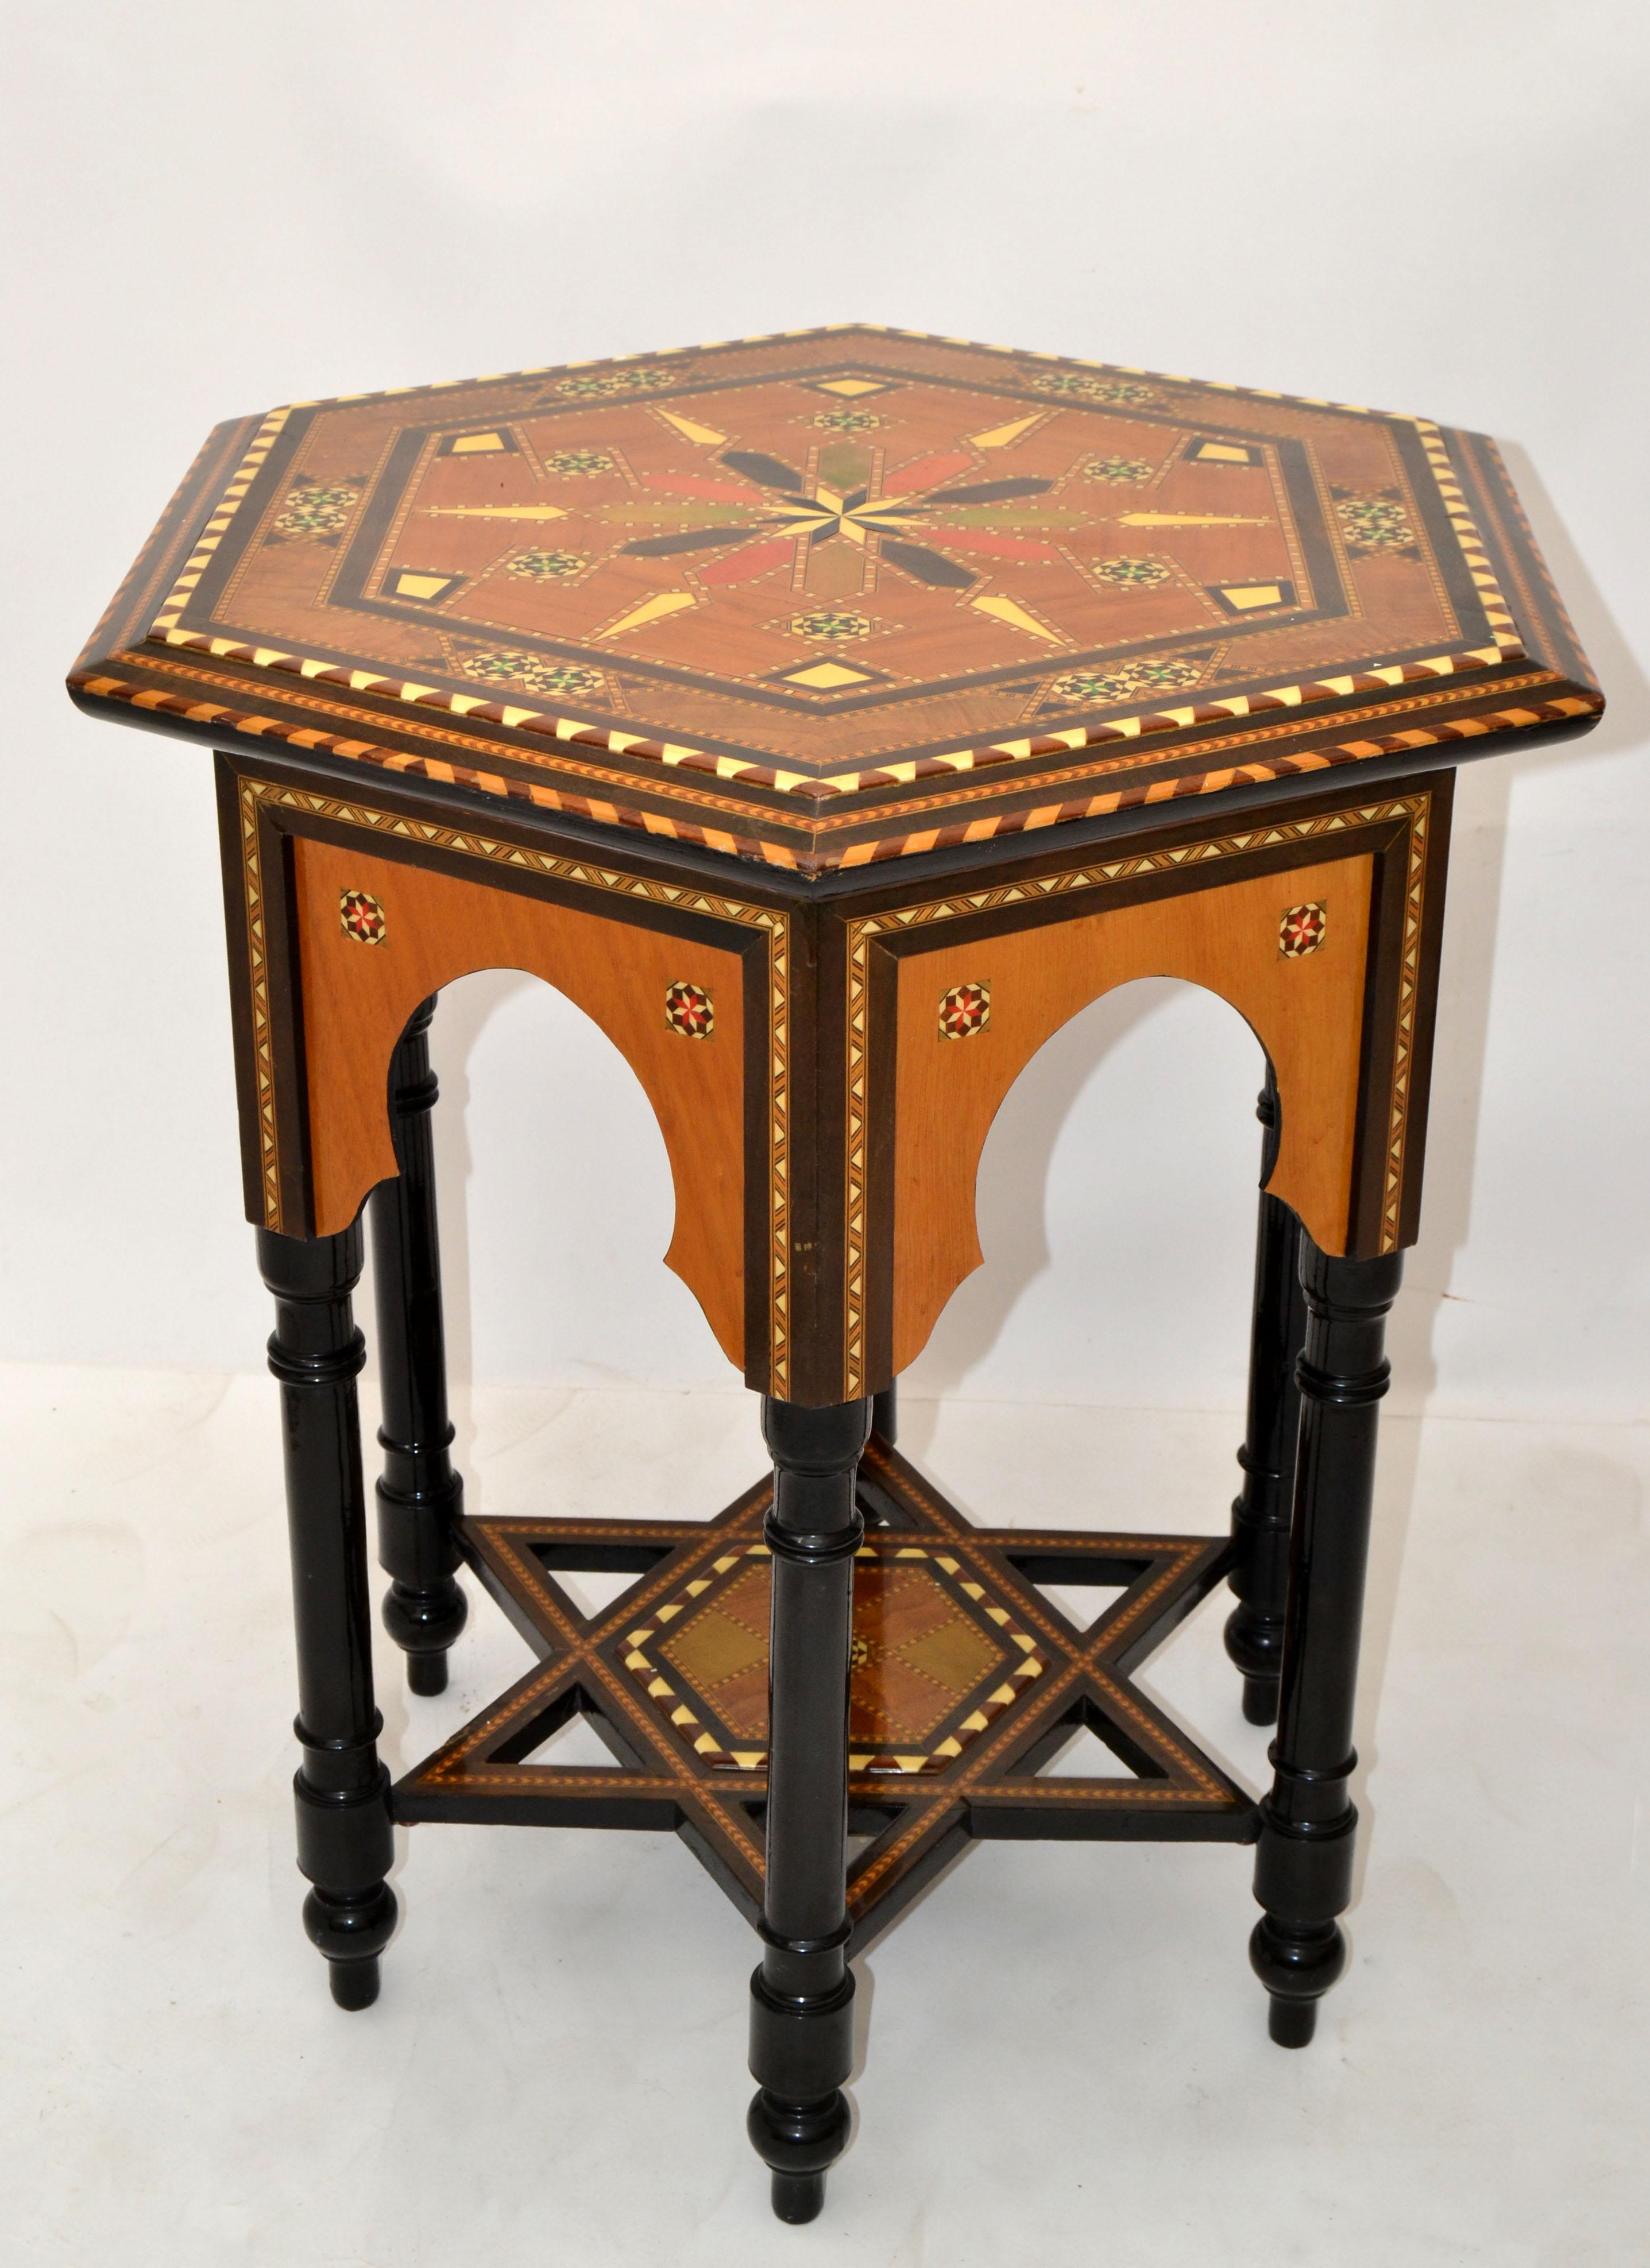 Hexagonal Wood Marquetry Moroccan Handmade Center Table Fruitwood Midcentury For Sale 7